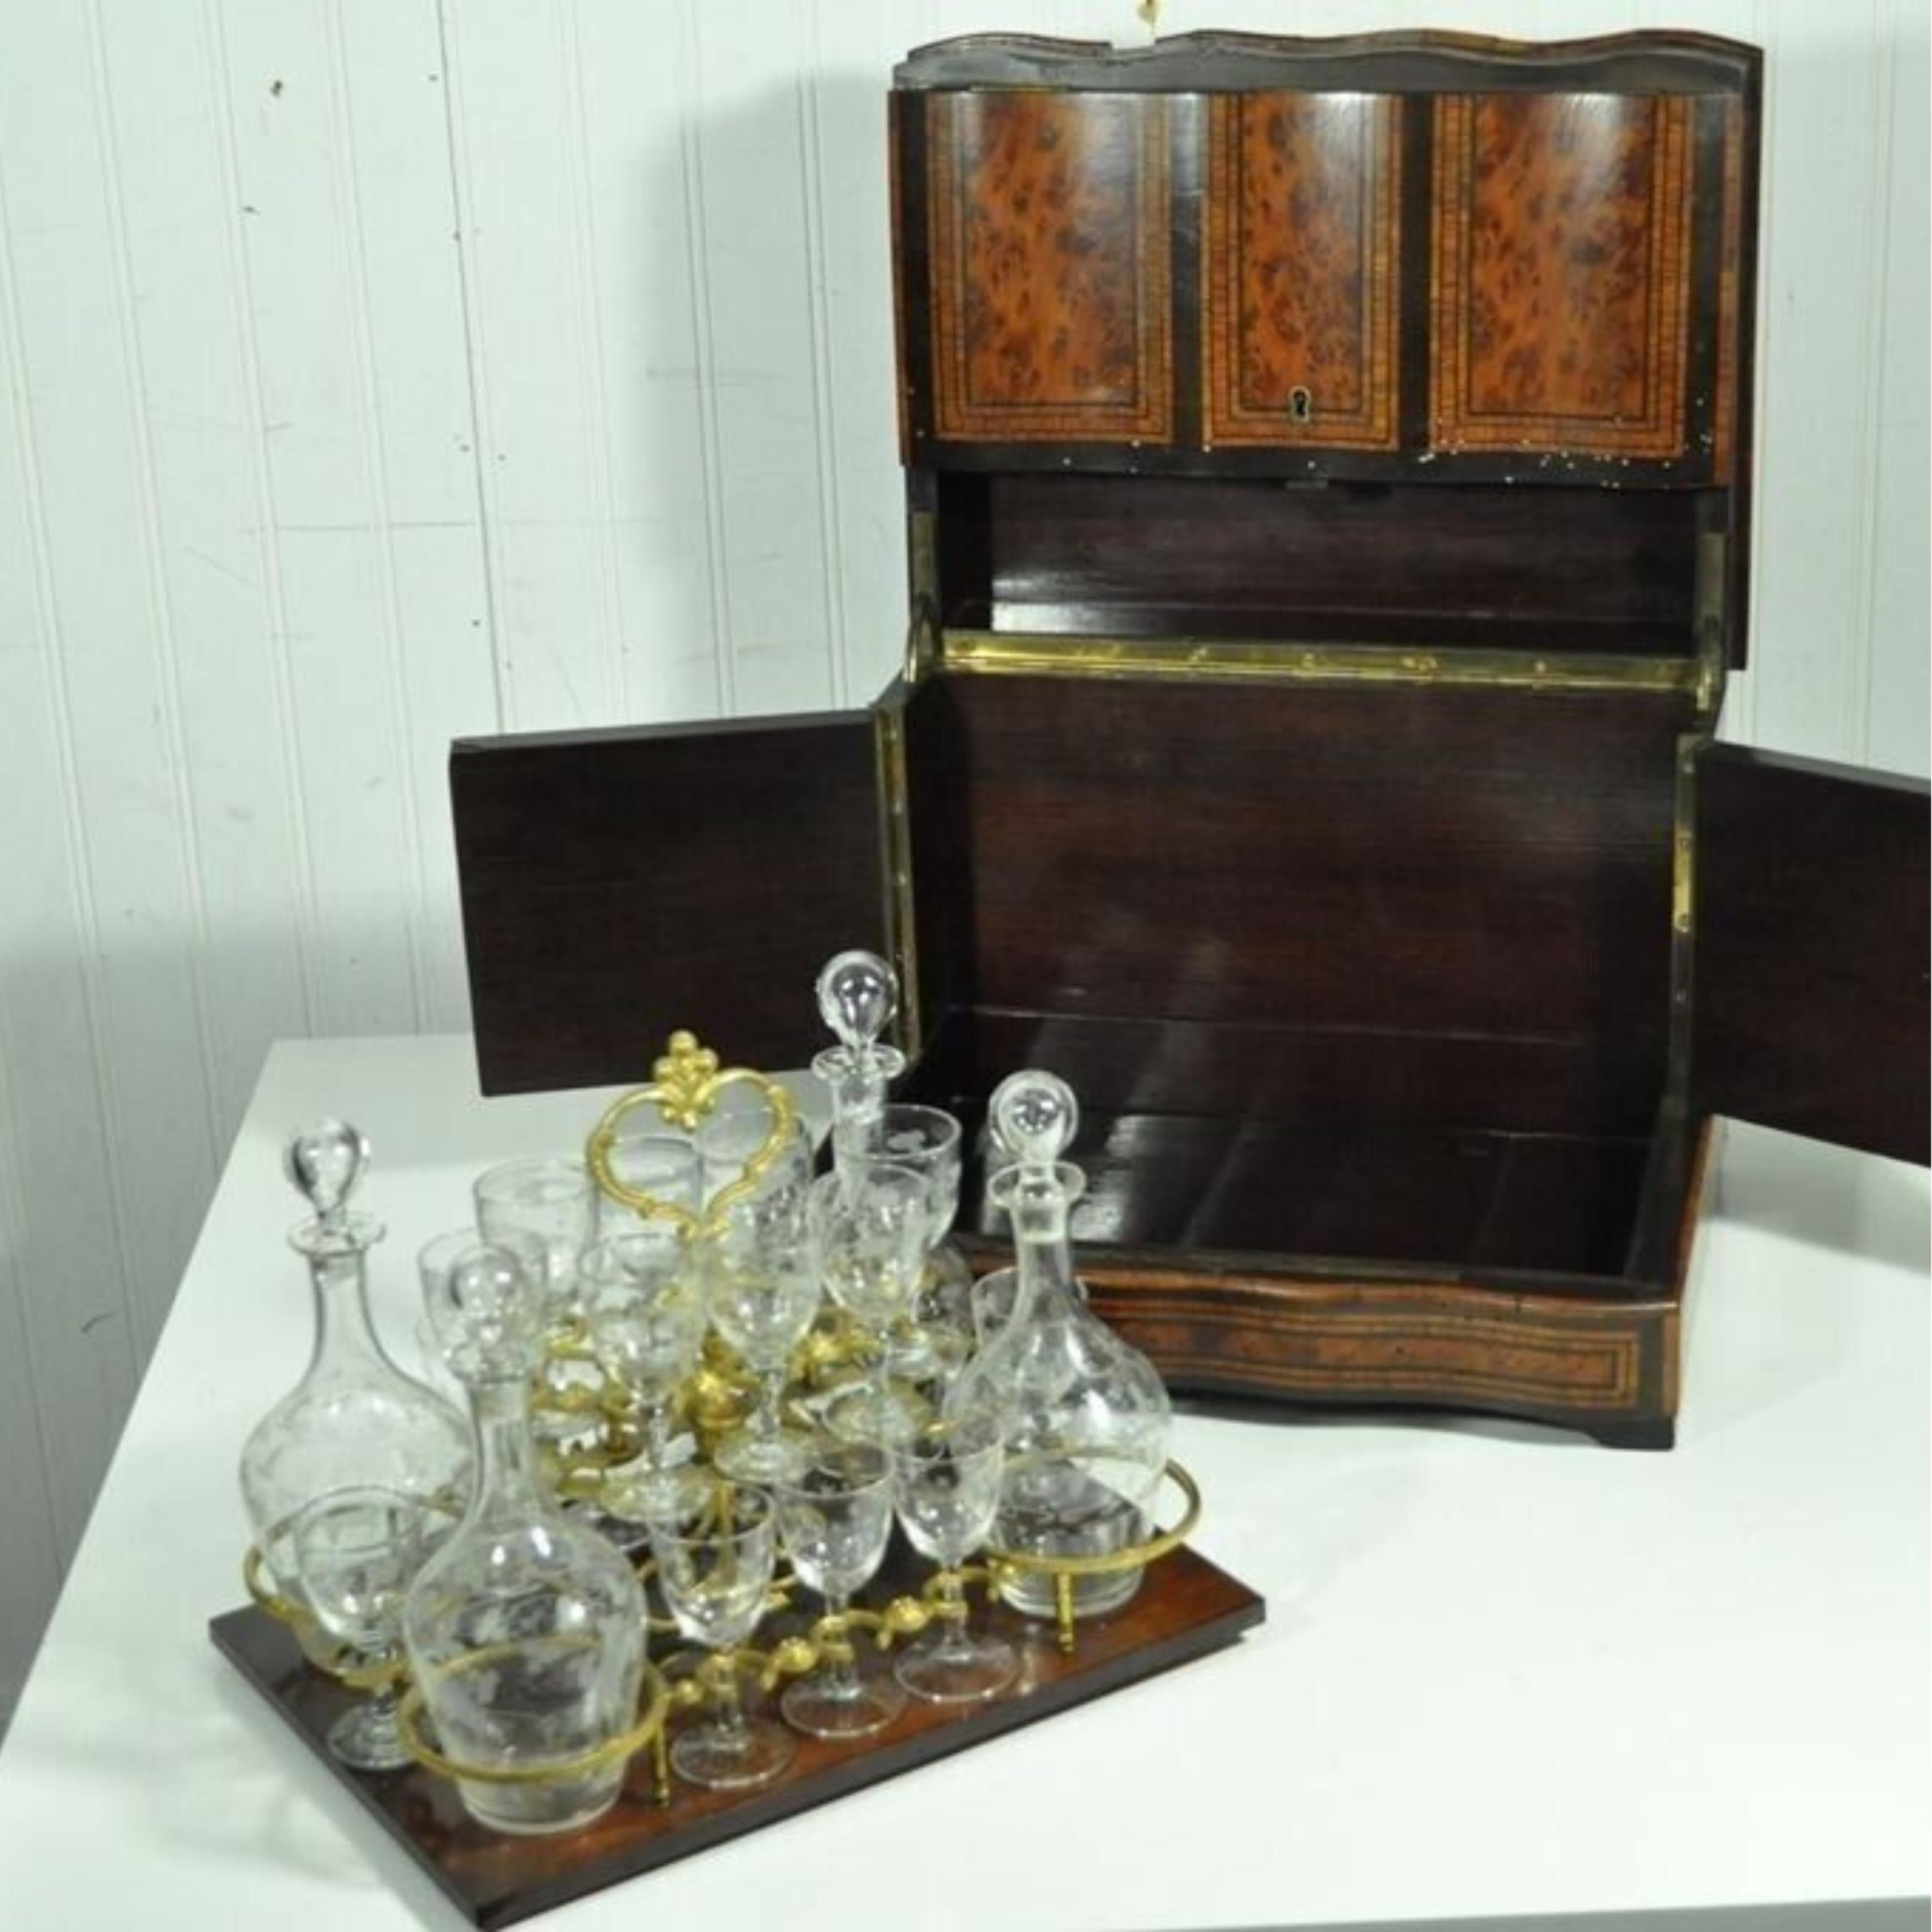 French Provincial Antique French Brass Inlay Tantalus Box Cordial Decanter Set Liquor Cabinet For Sale